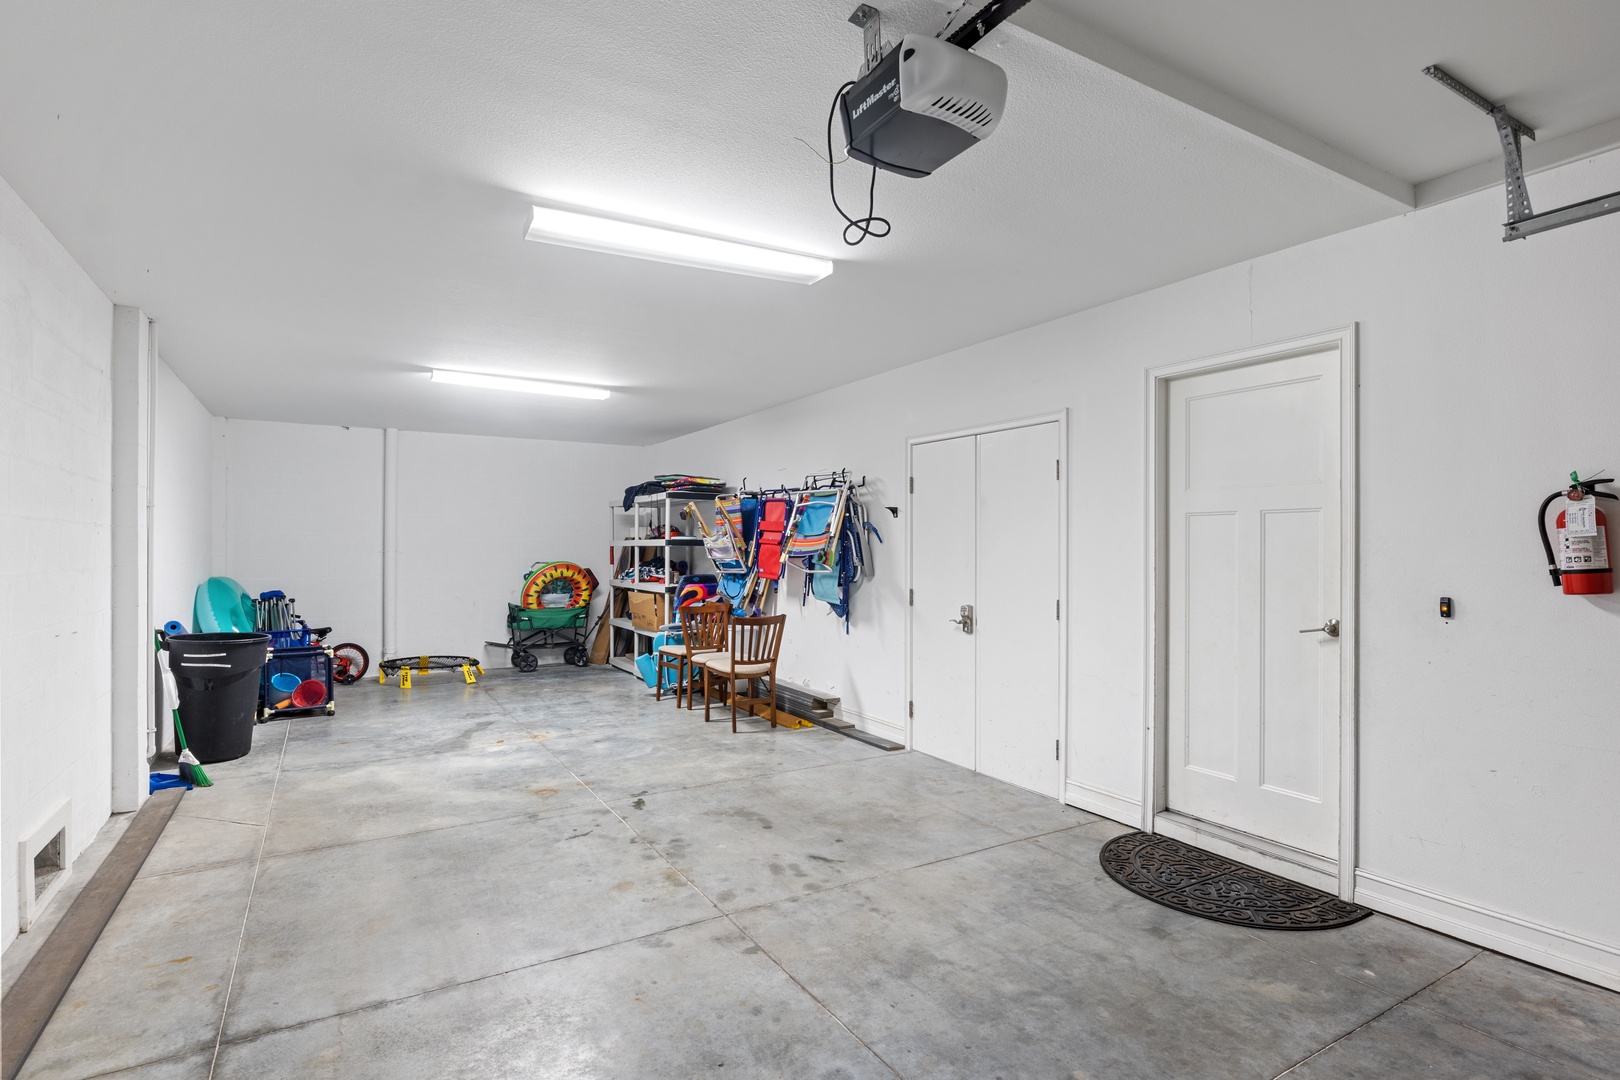 Big Garage with beach cart and chairs